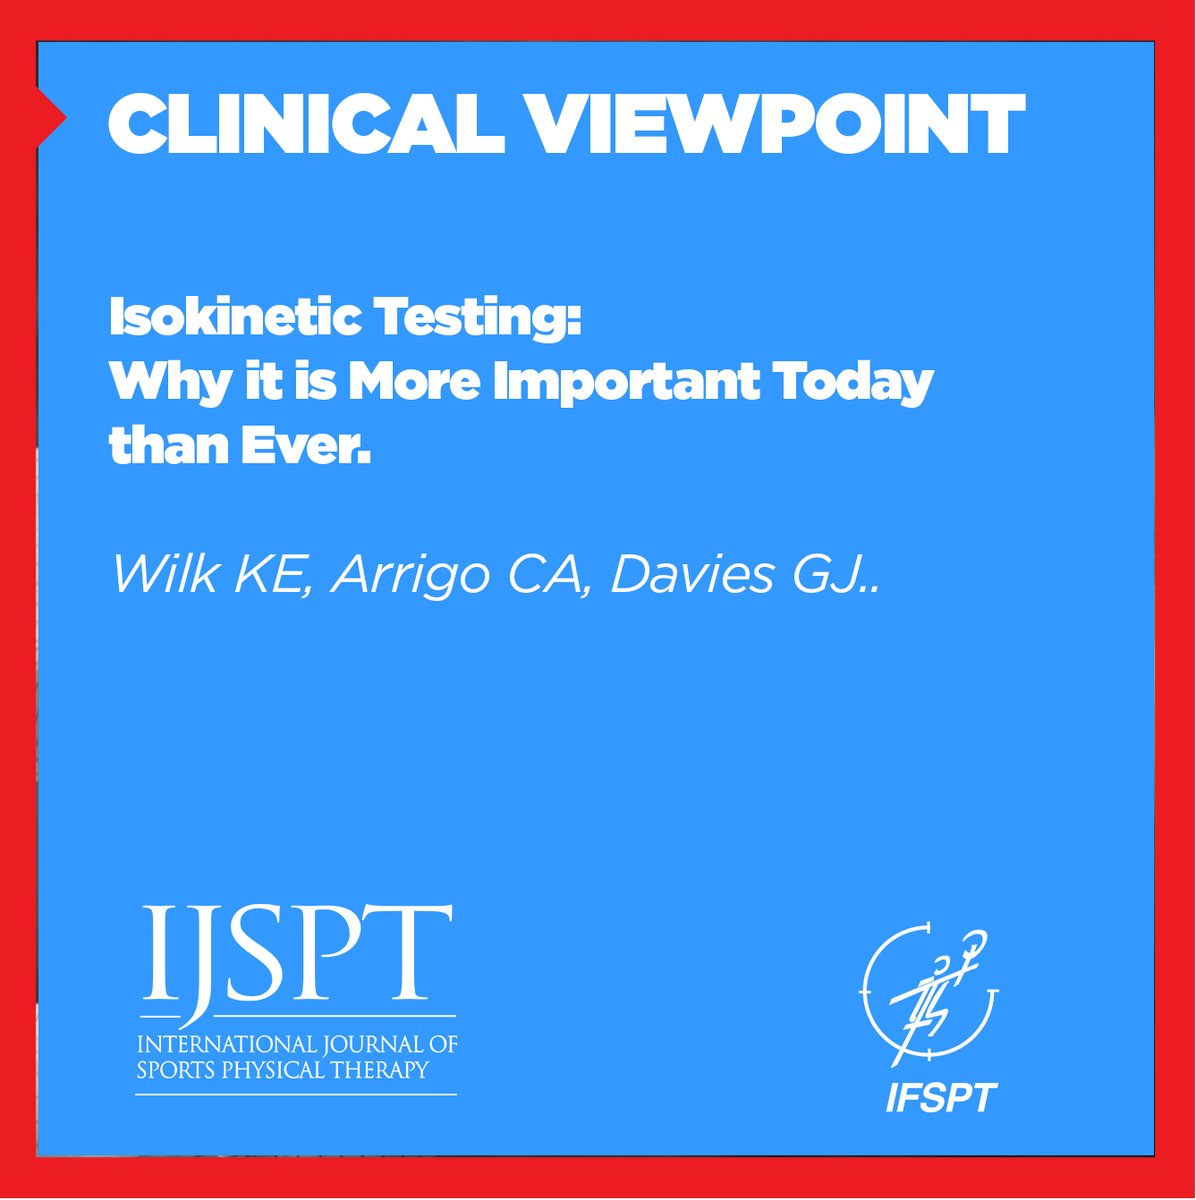 CLINICAL VIEWPOINT: Isokinetic Testing: Why it is More Important Today than Ever. Wilk KE, Arrigo CA, Davies GJ. ijspt.org/clinical-viewp…